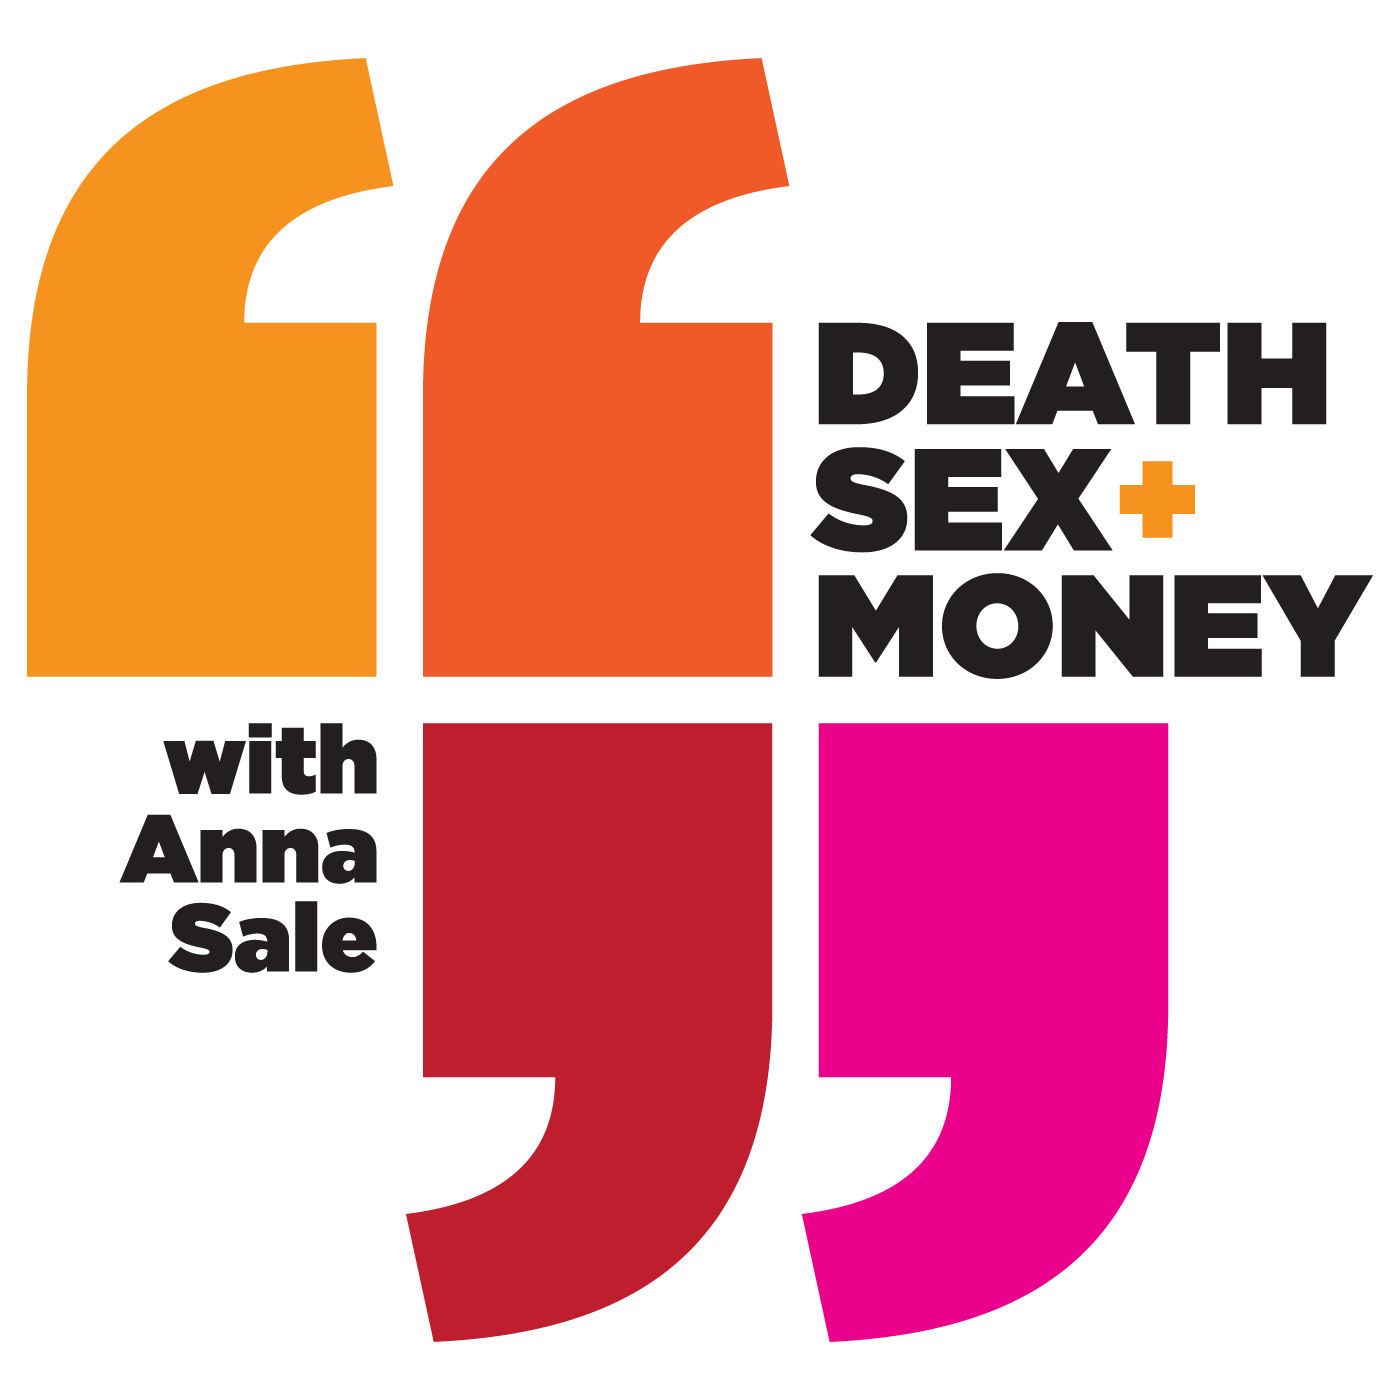 Death, Sex, and Money - Cheating happens